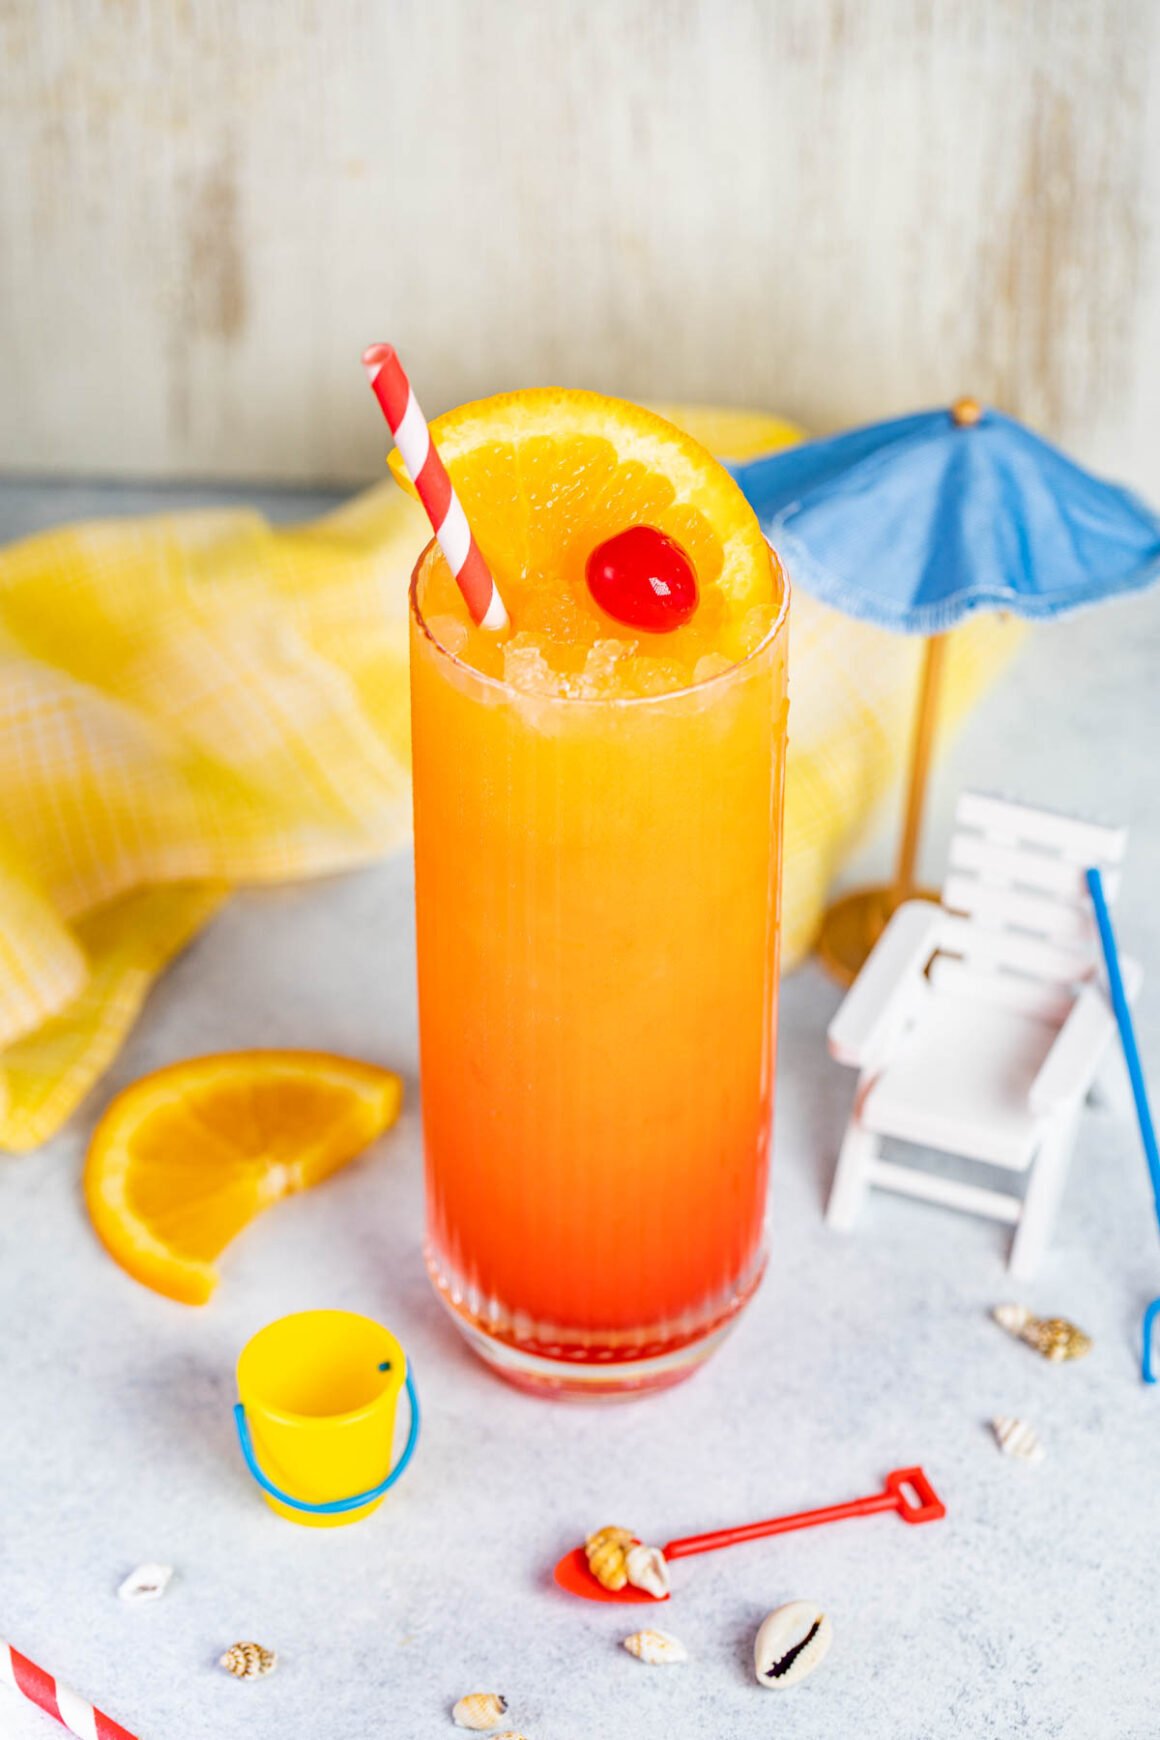 Sex on the Beach is another classic beach cocktail recipe that you must try on your next vacation, the combination of fruit juice with peach liqueur will make your sense of taste explode!

